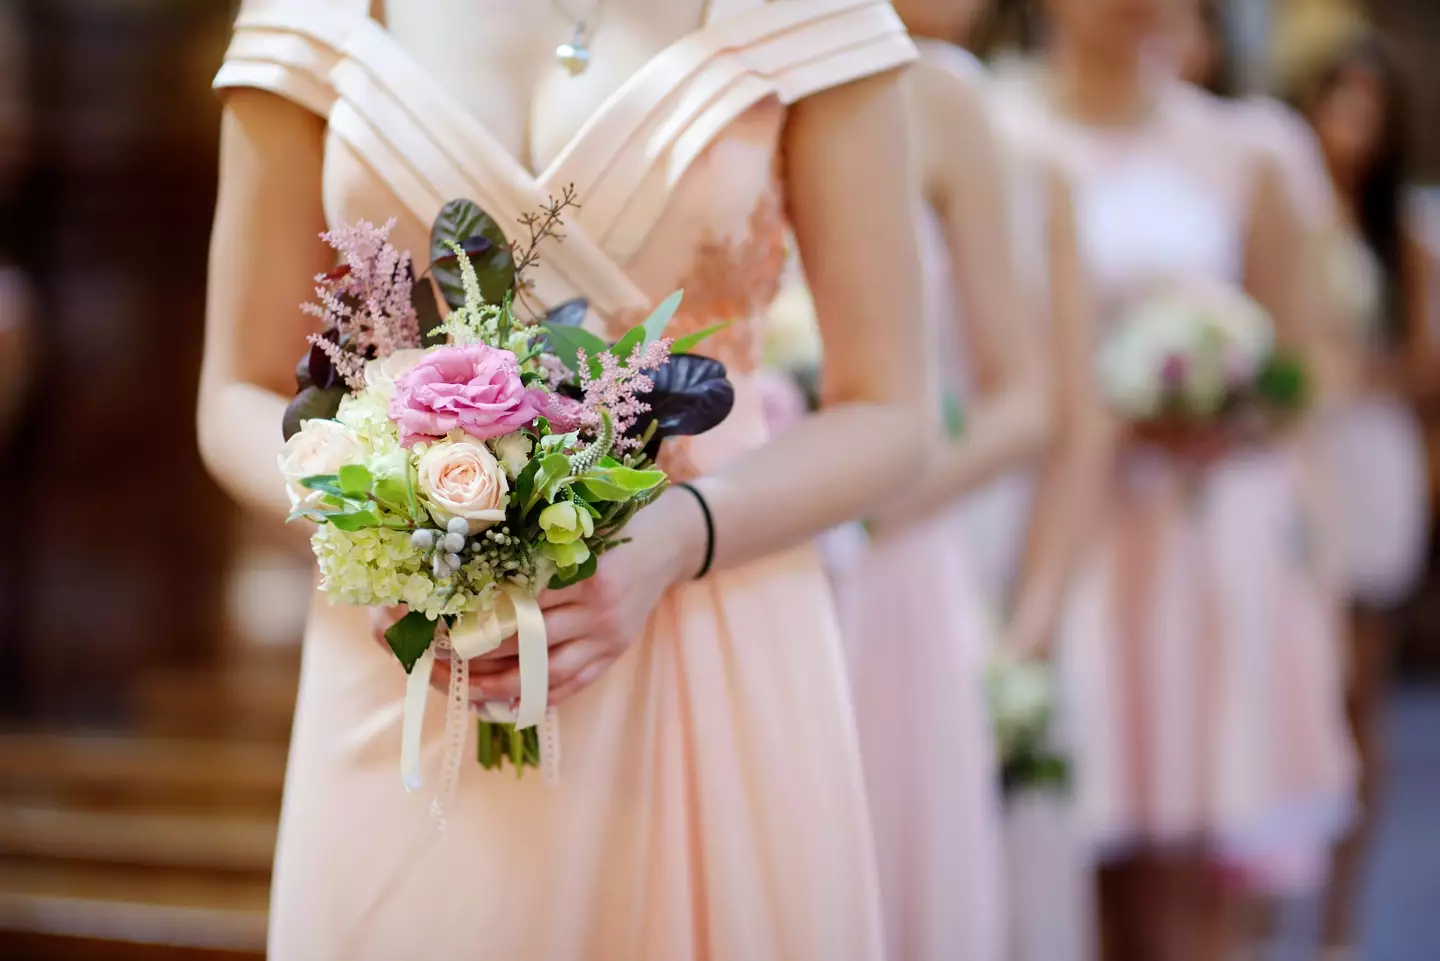 A bride has revealed how she fired her maid of honour over her choice of a plus one (